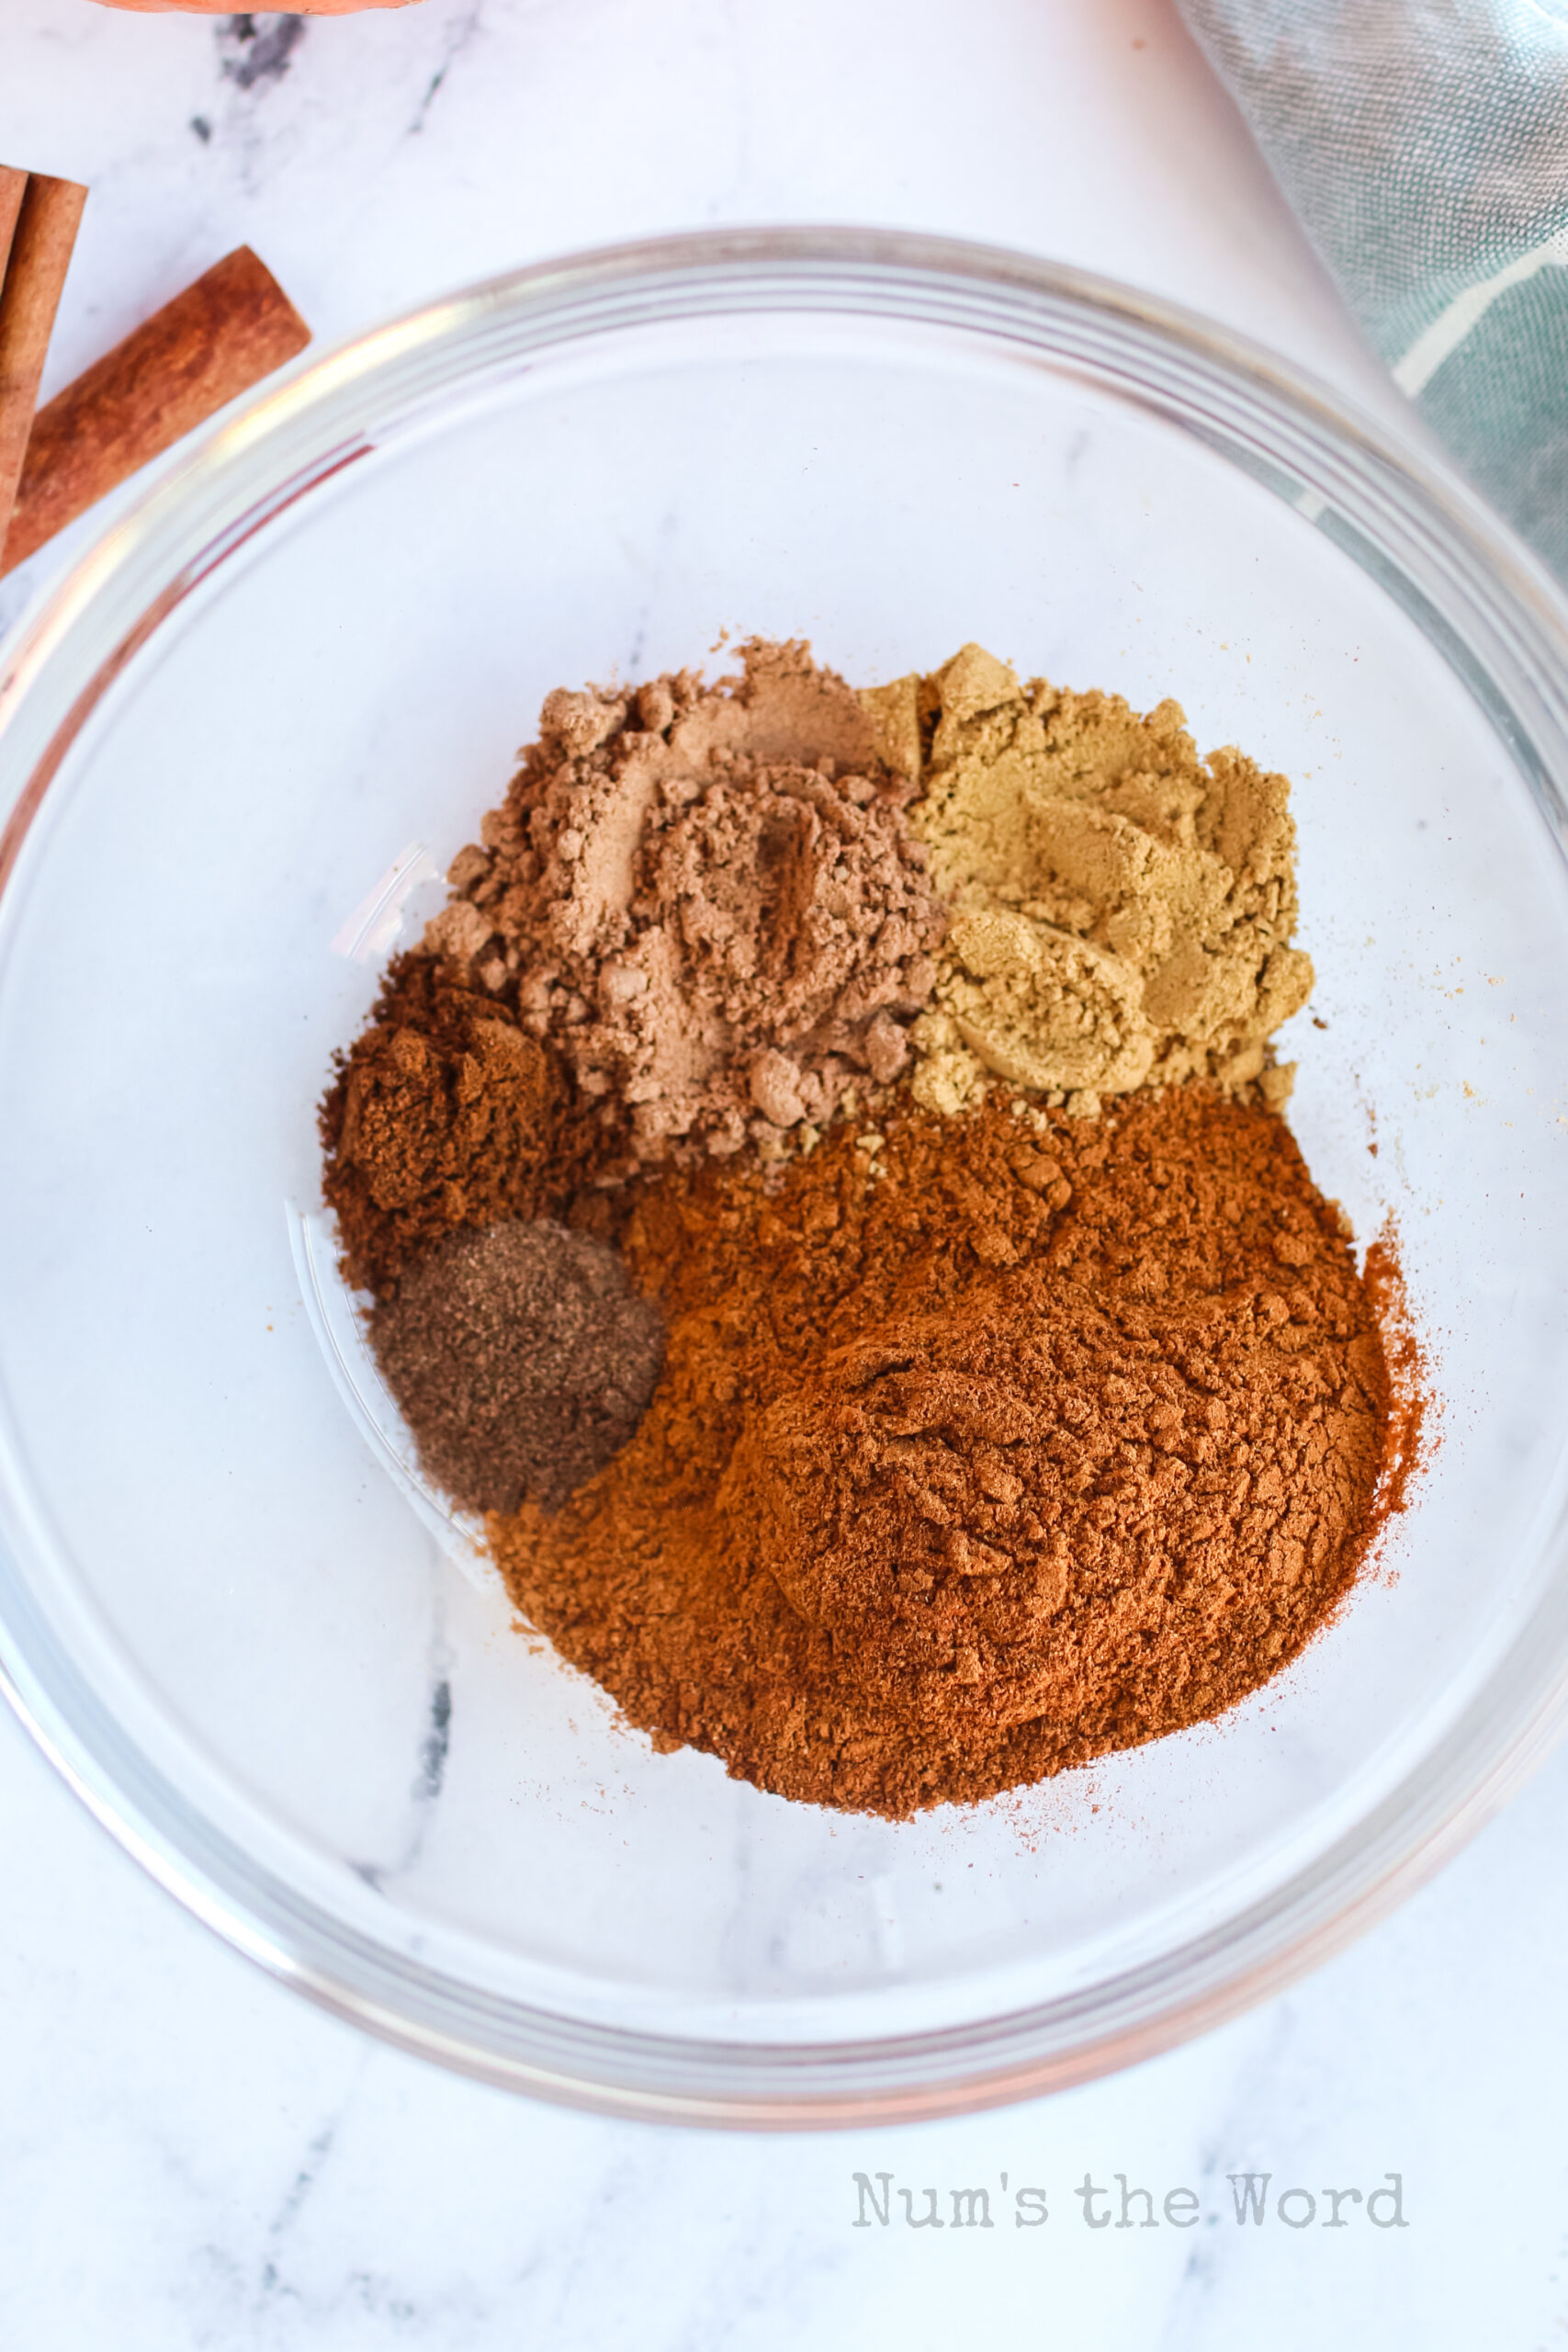 All spices in a bowl unmixed.